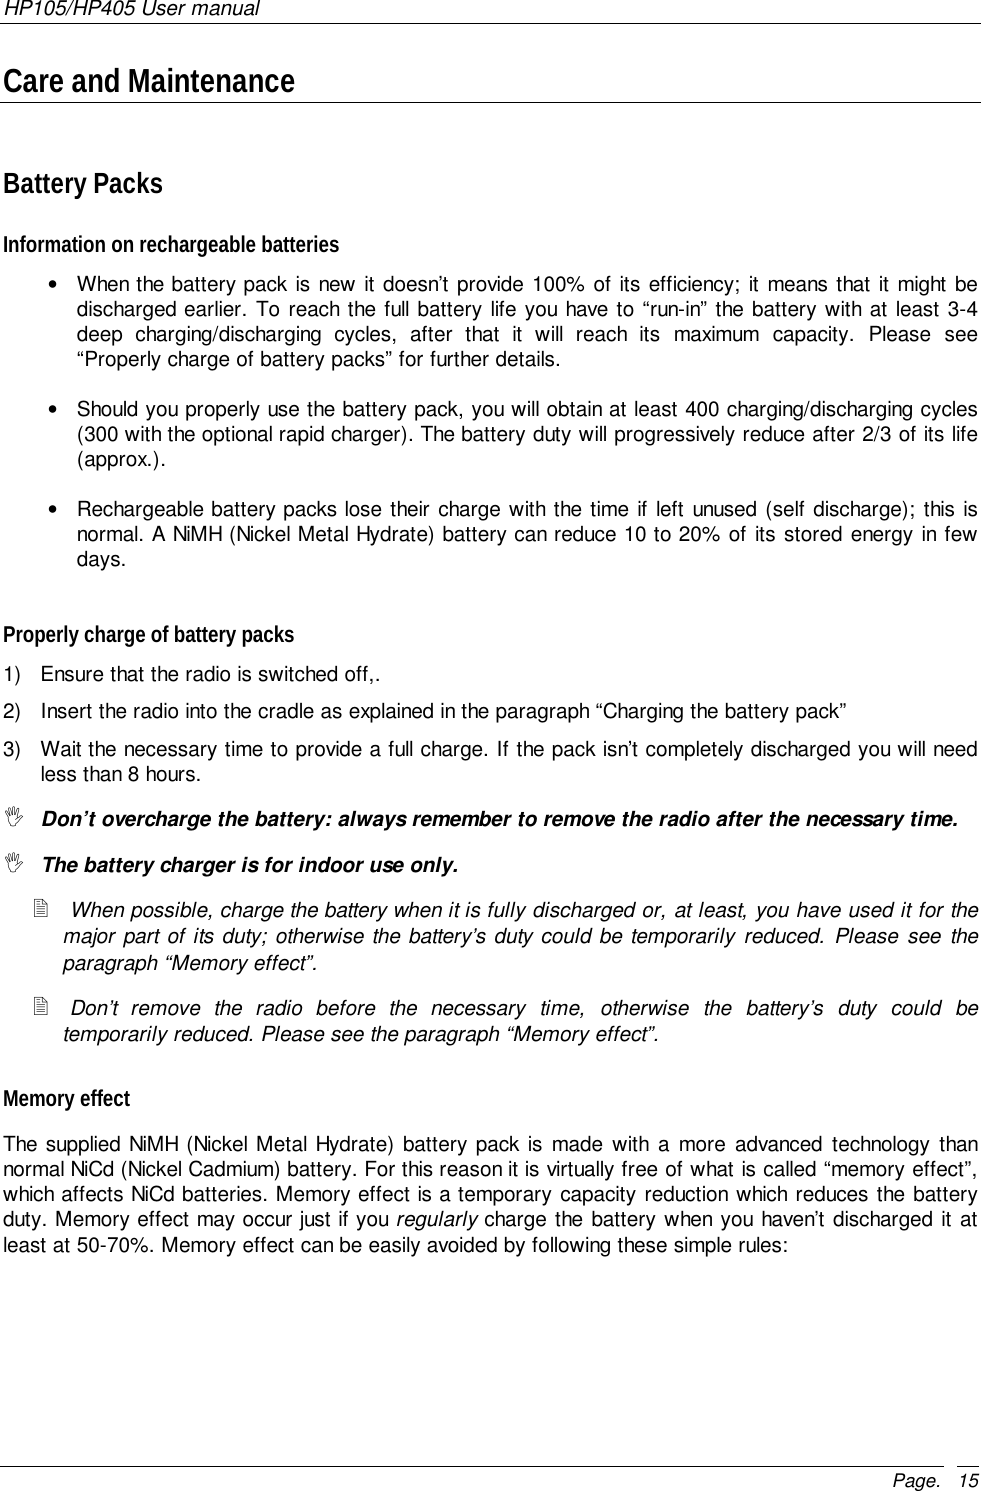 HP105/HP405 User manualPage. 15Care and MaintenanceBattery PacksInformation on rechargeable batteries•  When the battery pack is new it doesn’t provide 100% of its efficiency; it means that it might bedischarged earlier. To reach the full battery life you have to “run-in” the battery with at least 3-4deep charging/discharging cycles, after that it will reach its maximum capacity. Please see“Properly charge of battery packs” for further details.•  Should you properly use the battery pack, you will obtain at least 400 charging/discharging cycles(300 with the optional rapid charger). The battery duty will progressively reduce after 2/3 of its life(approx.).•  Rechargeable battery packs lose their charge with the time if left unused (self discharge); this isnormal. A NiMH (Nickel Metal Hydrate) battery can reduce 10 to 20% of its stored energy in fewdays.Properly charge of battery packs1)  Ensure that the radio is switched off,.2)  Insert the radio into the cradle as explained in the paragraph “Charging the battery pack”3)  Wait the necessary time to provide a full charge. If the pack isn’t completely discharged you will needless than 8 hours.&quot; Don’t overcharge the battery: always remember to remove the radio after the necessary time.&quot; The battery charger is for indoor use only.! When possible, charge the battery when it is fully discharged or, at least, you have used it for themajor part of its duty; otherwise the battery’s duty could be temporarily reduced. Please see theparagraph “Memory effect”.! Don’t remove the radio before the necessary time, otherwise the battery’s duty could betemporarily reduced. Please see the paragraph “Memory effect”.Memory effectThe supplied NiMH (Nickel Metal Hydrate) battery pack is made with a more advanced technology thannormal NiCd (Nickel Cadmium) battery. For this reason it is virtually free of what is called “memory effect”,which affects NiCd batteries. Memory effect is a temporary capacity reduction which reduces the batteryduty. Memory effect may occur just if you regularly charge the battery when you haven’t discharged it atleast at 50-70%. Memory effect can be easily avoided by following these simple rules: